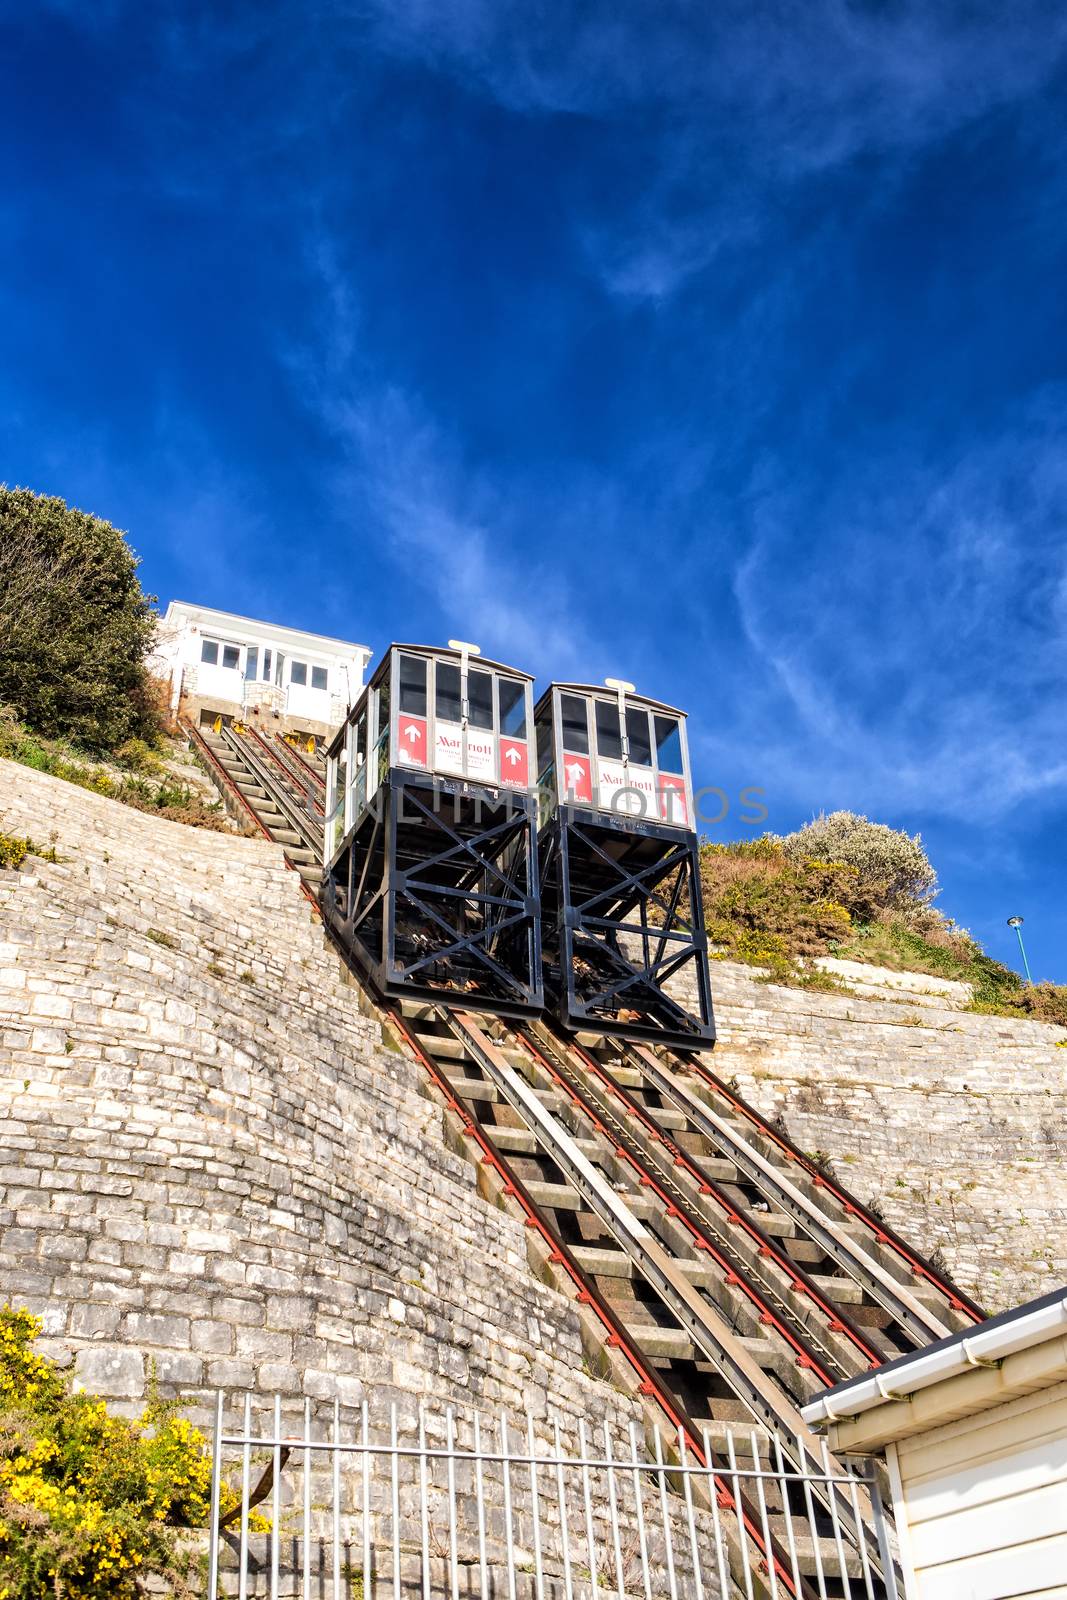 BOURNEMOUTH, UNITED KINGDOM: The West Cliff Lift by mitakag